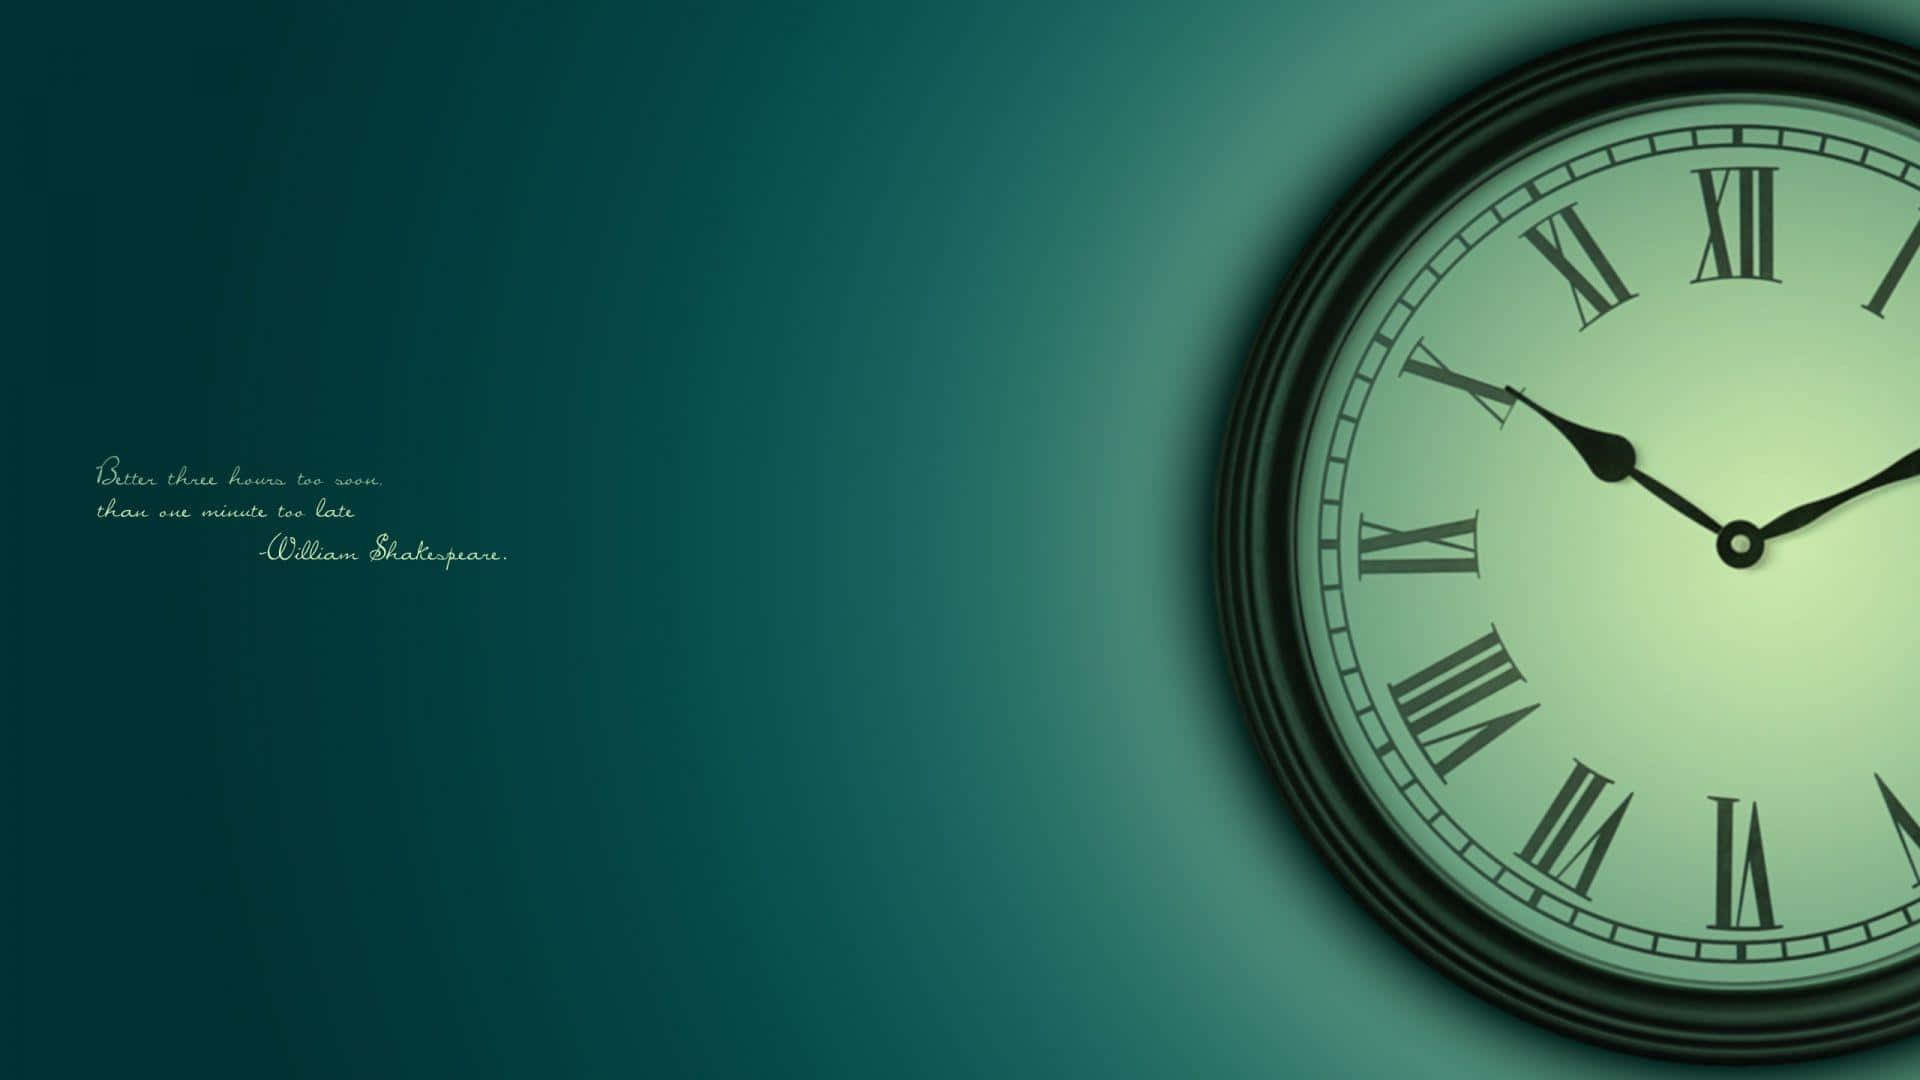 A Clock With Roman Numerals On A Green Background